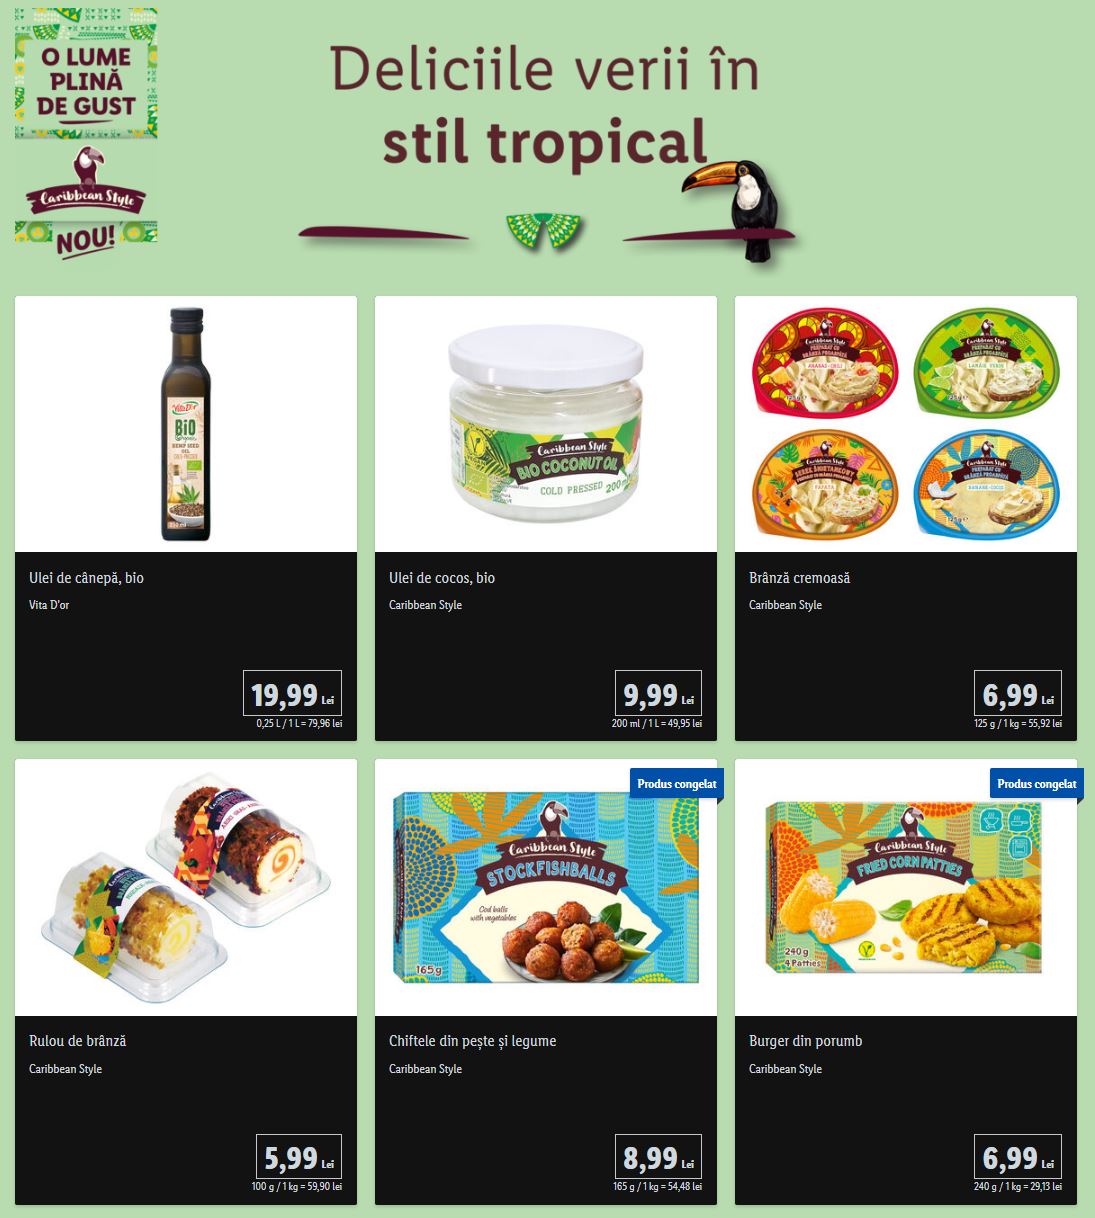 LIDL Romania tropical promotion